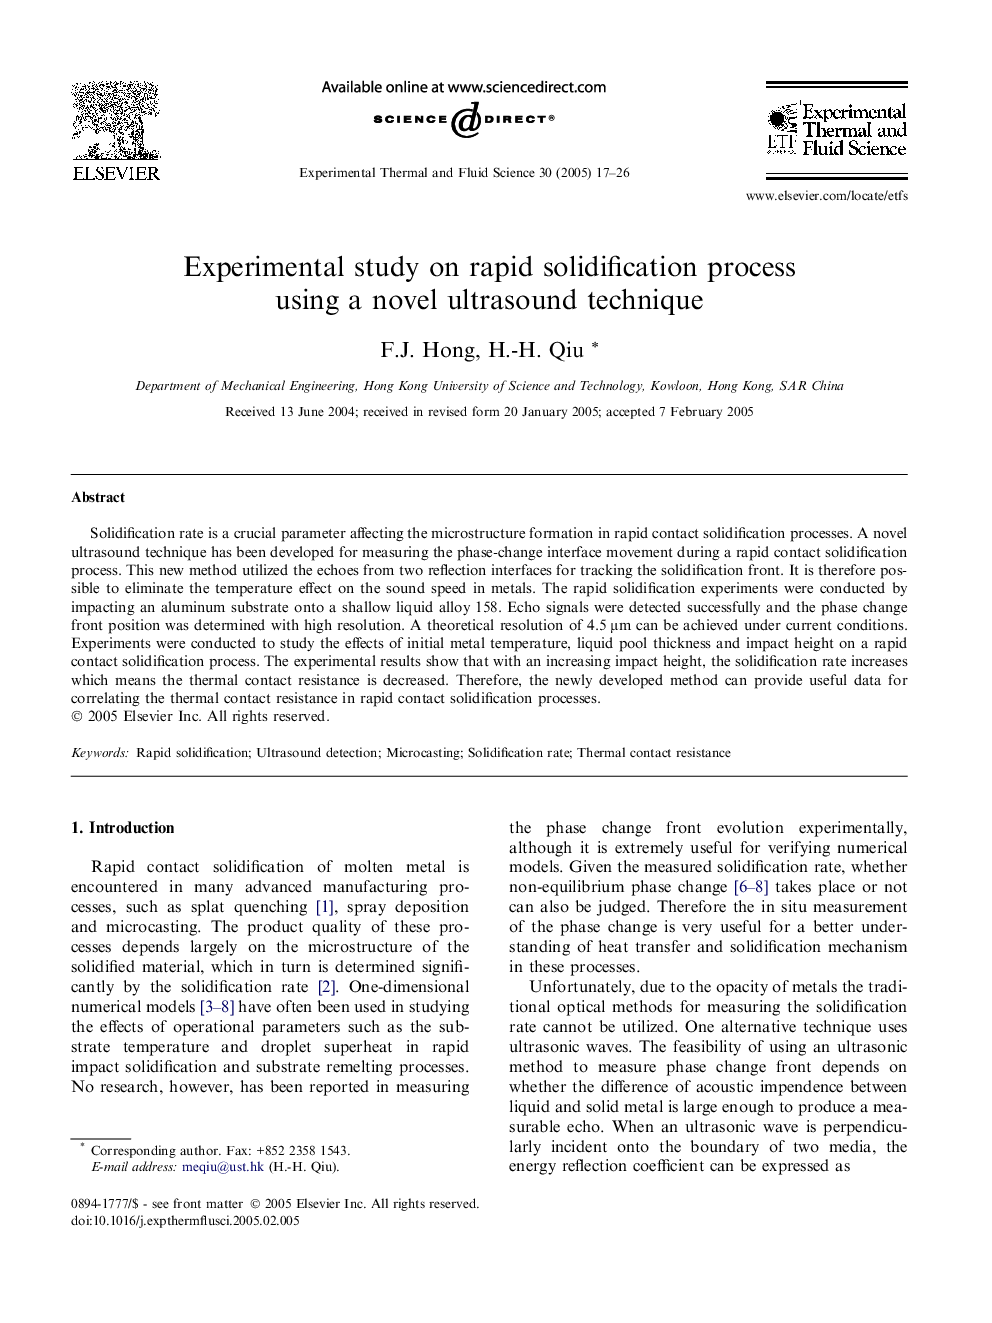 Experimental study on rapid solidification process using a novel ultrasound technique